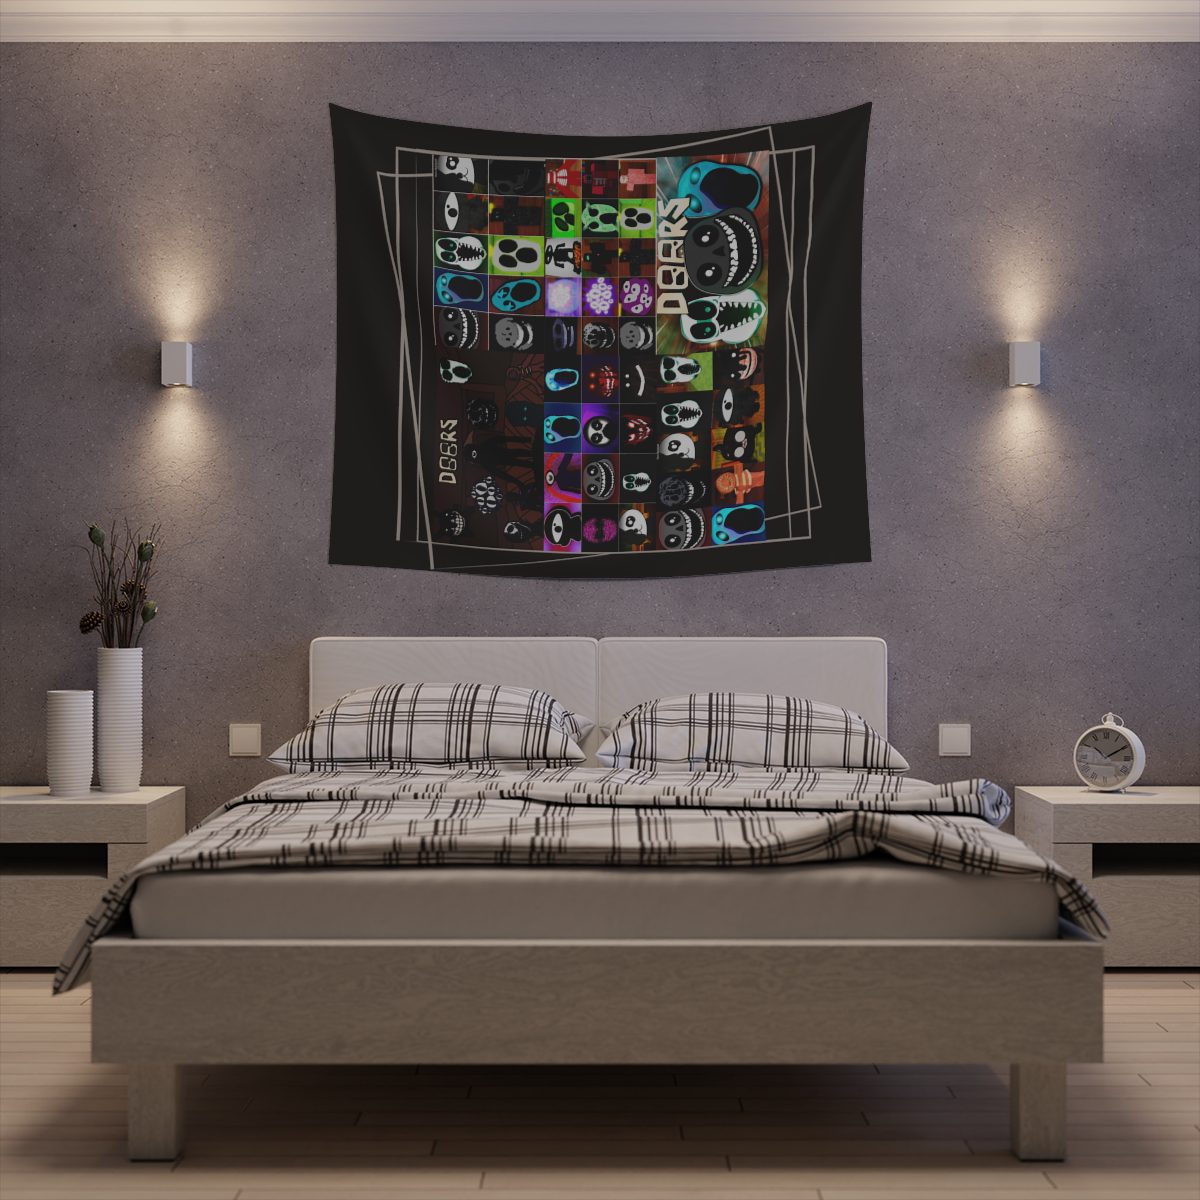 Invite your friends to a terrifying Halloween party with the DOOR ROBLOX horror tapestries.  Printed Wall Tapestry Cool Kiddo 32